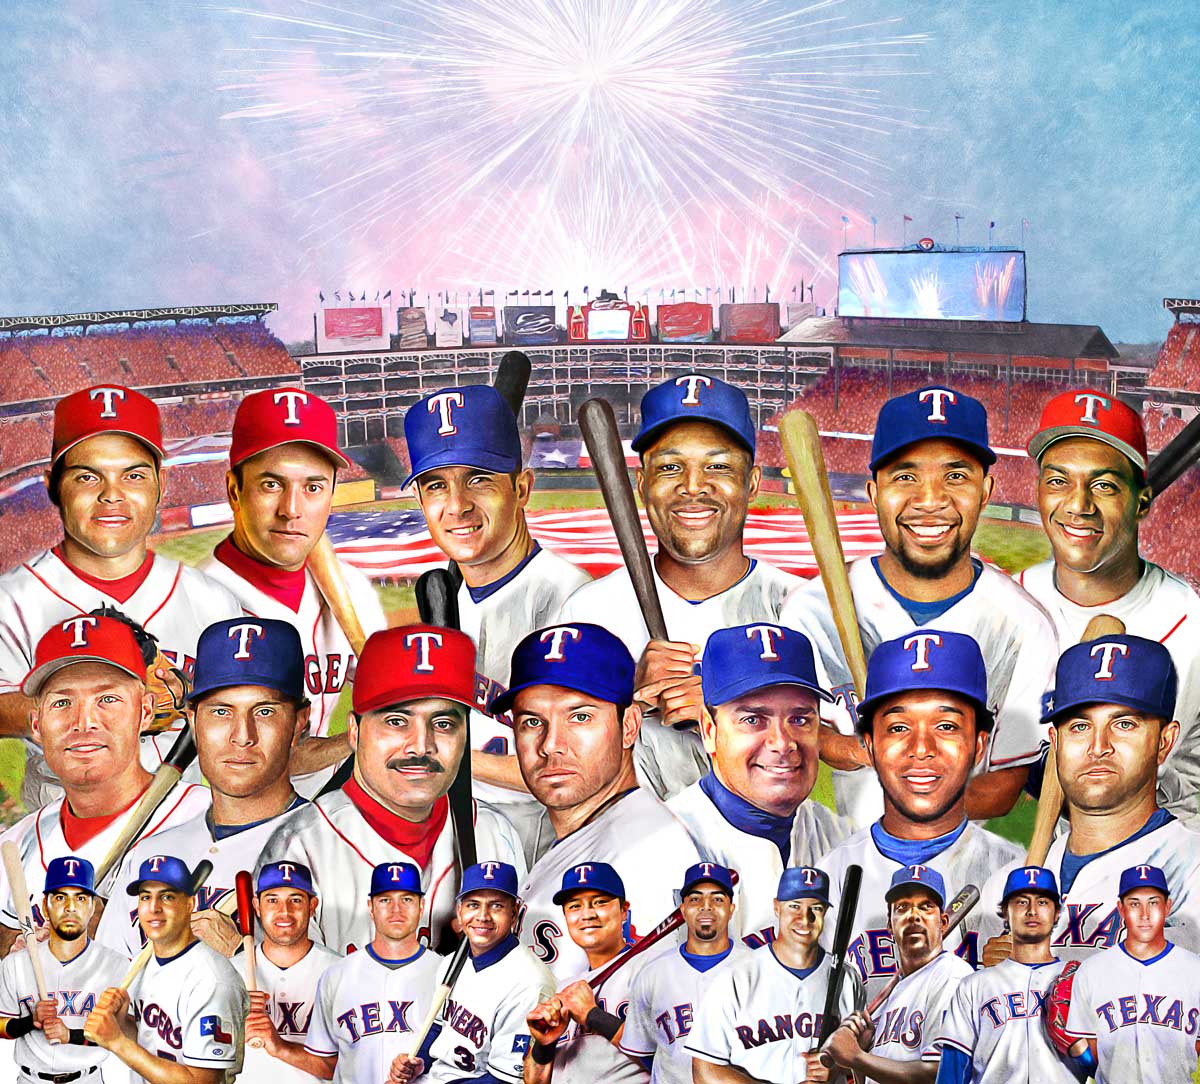 Meet the best Rangers to ever play at Globe Life Park